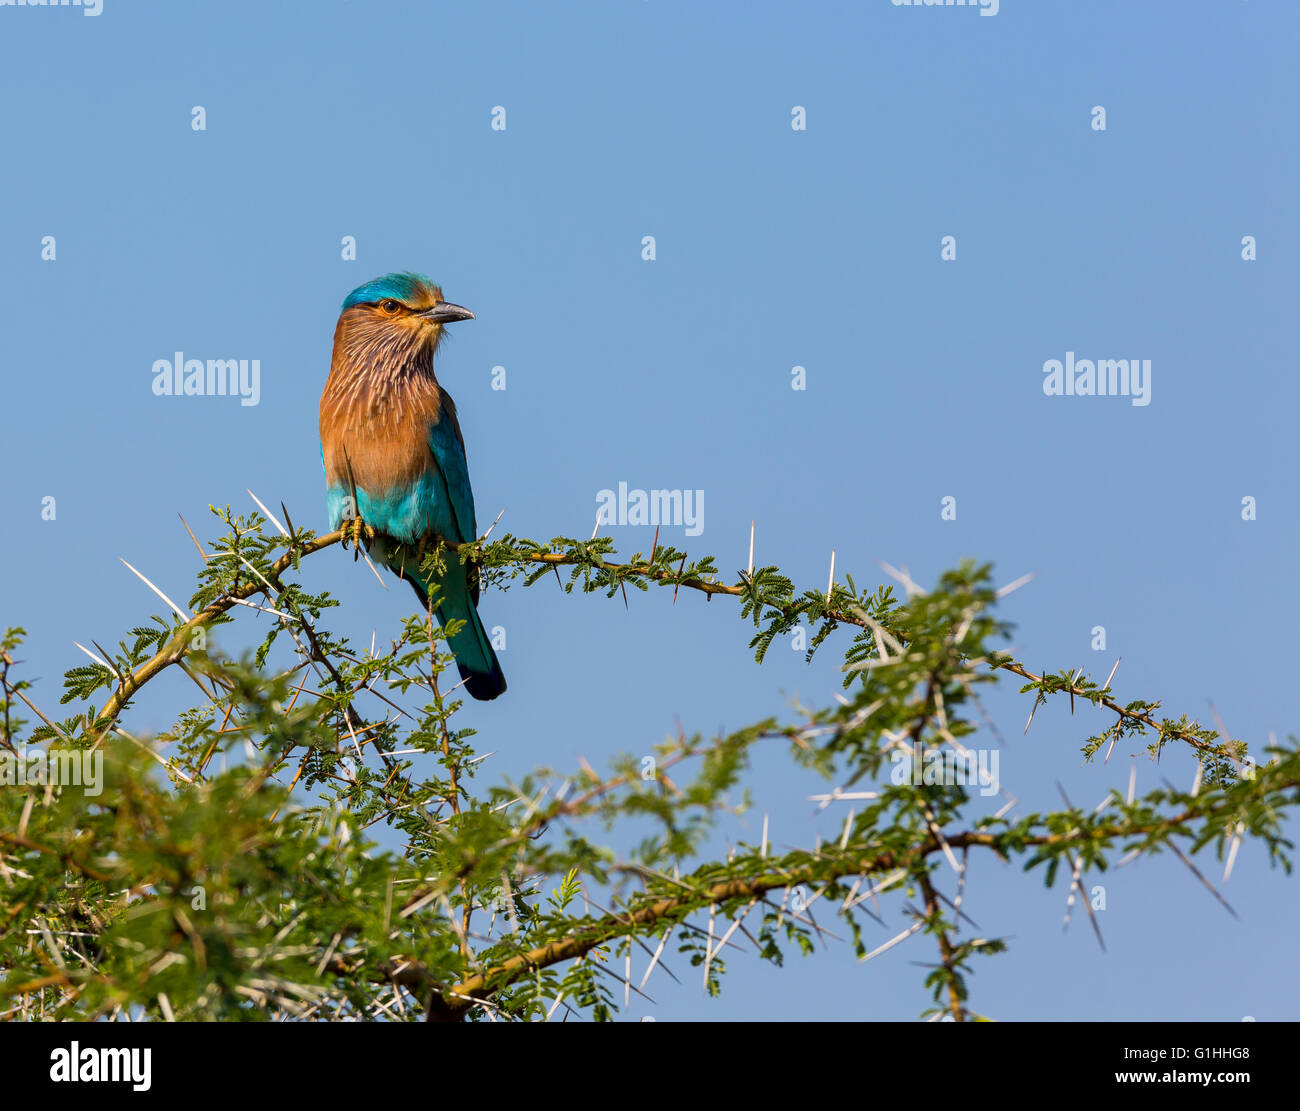 Indian Roller, a very colorful bird native of India. Stock Photo